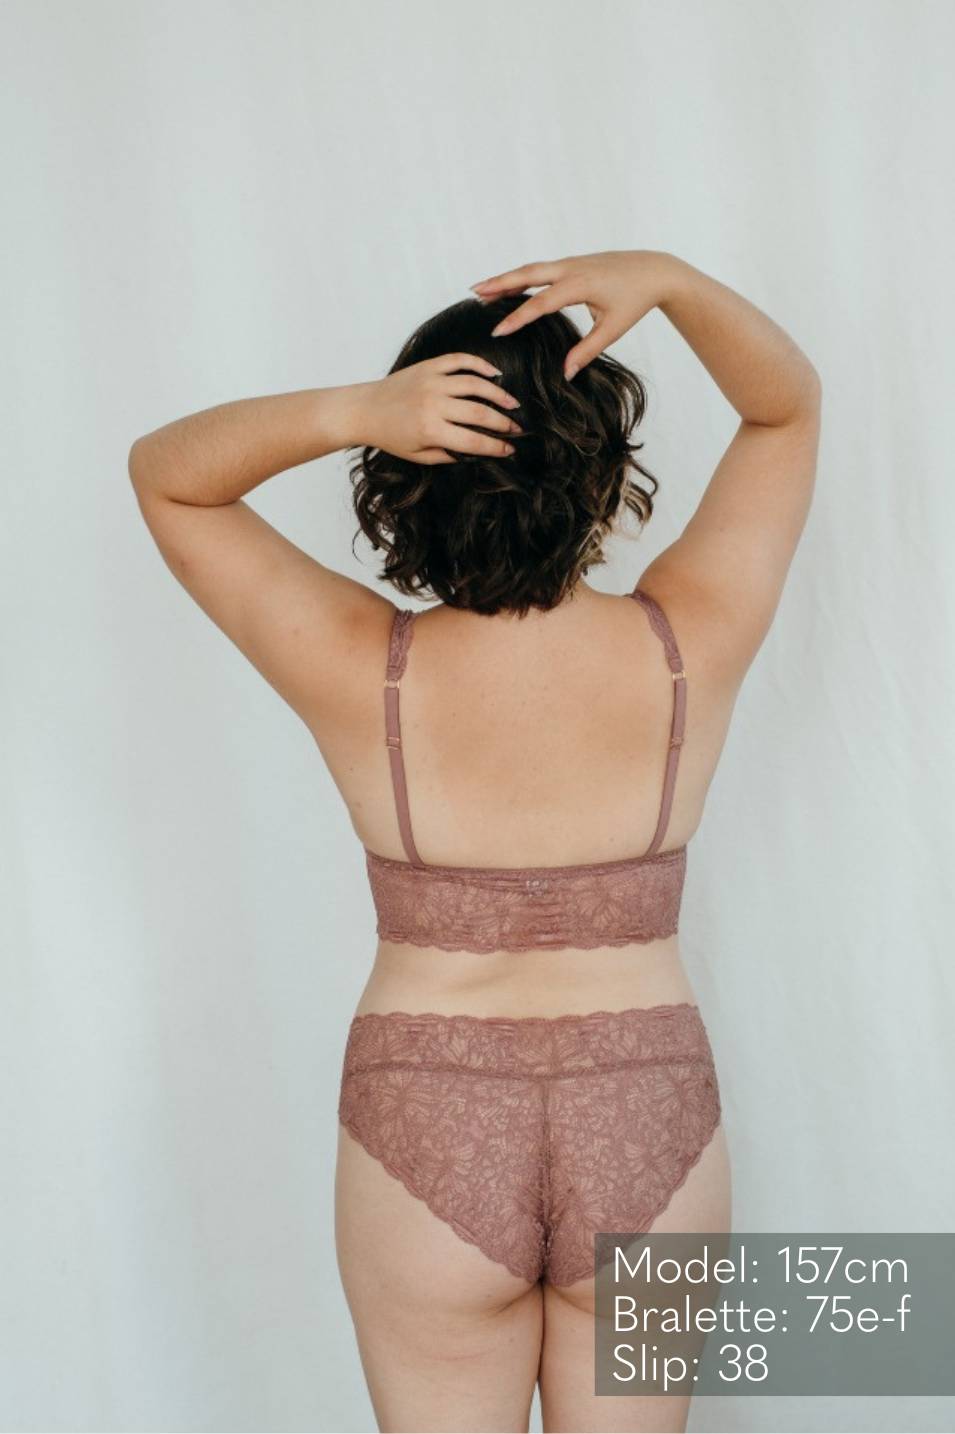 Model wears comfortable slip Belle in Smokey Rose and the matching Bralette.